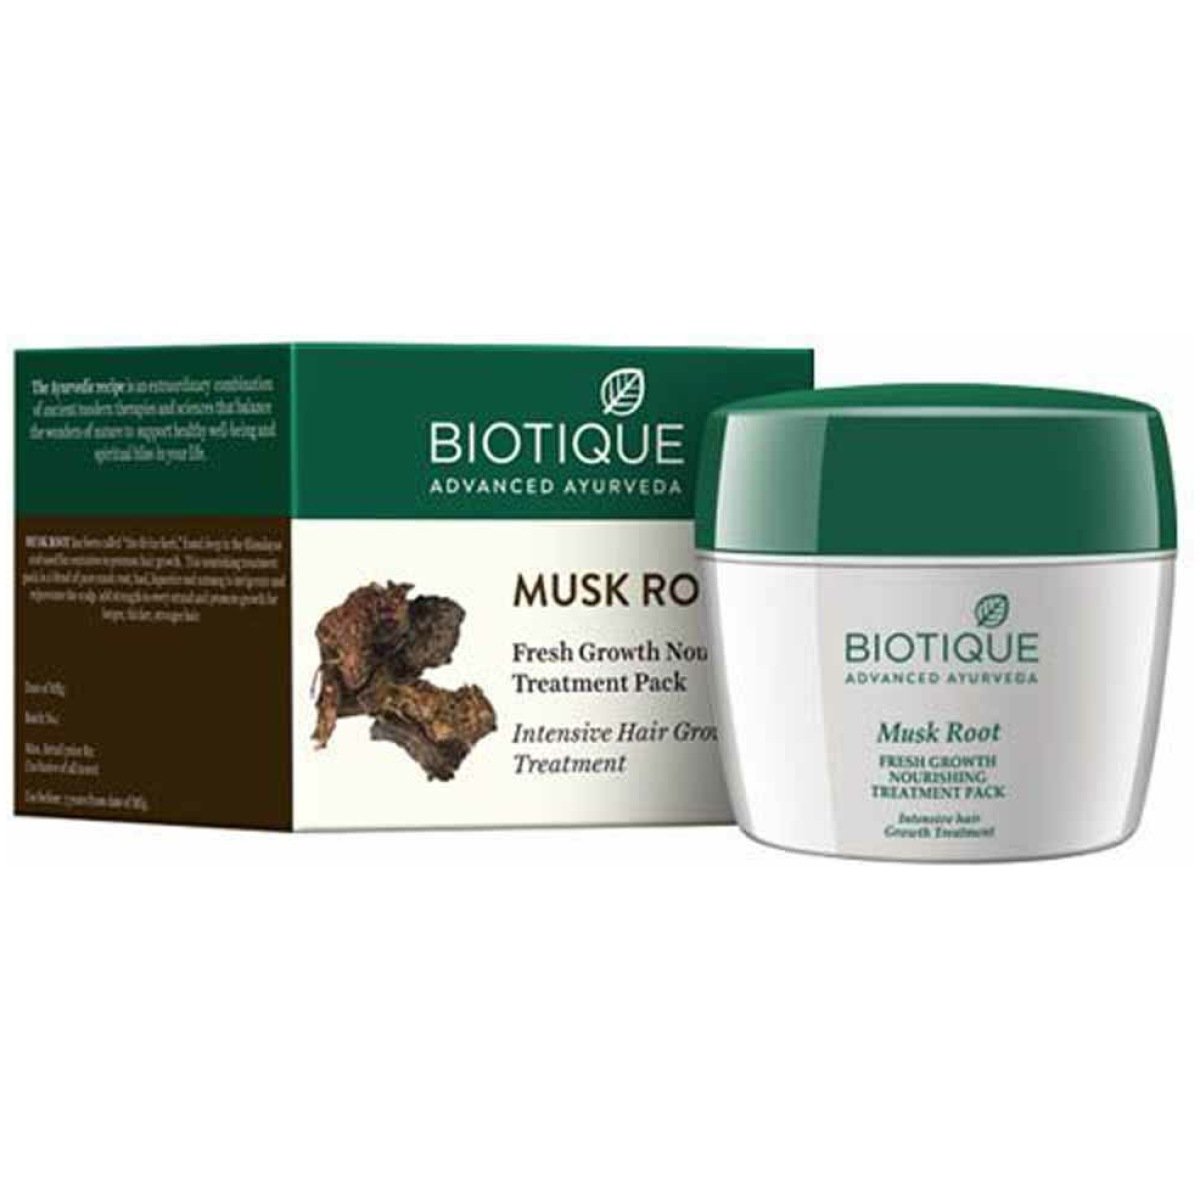 BIOTIQUE MUSK ROOT TREATMENT PACK 230g